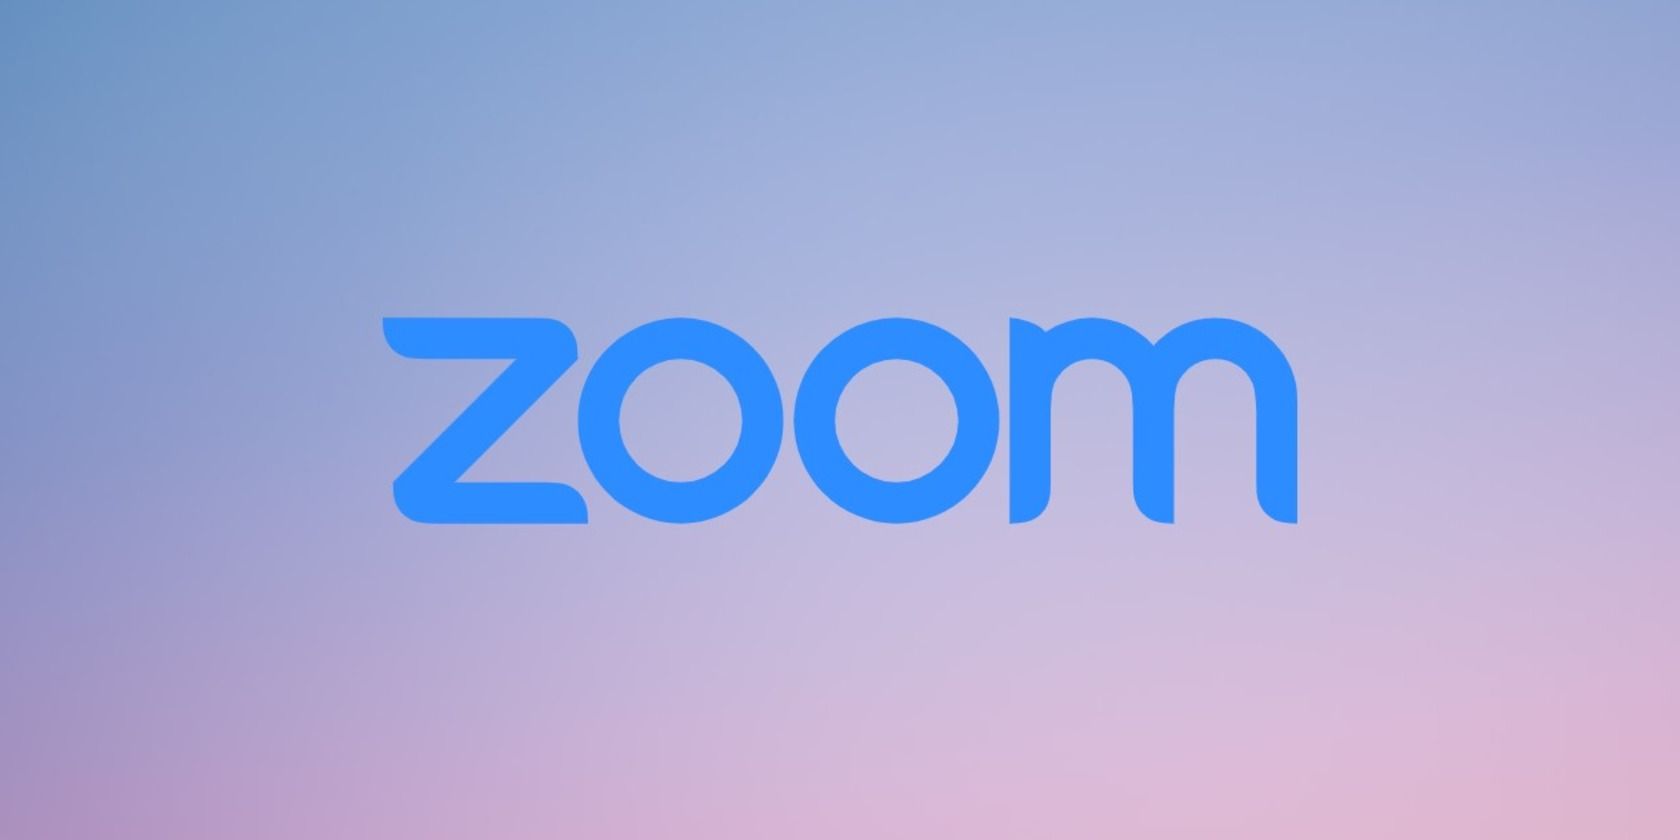 Zoom logo on a purple and blue background